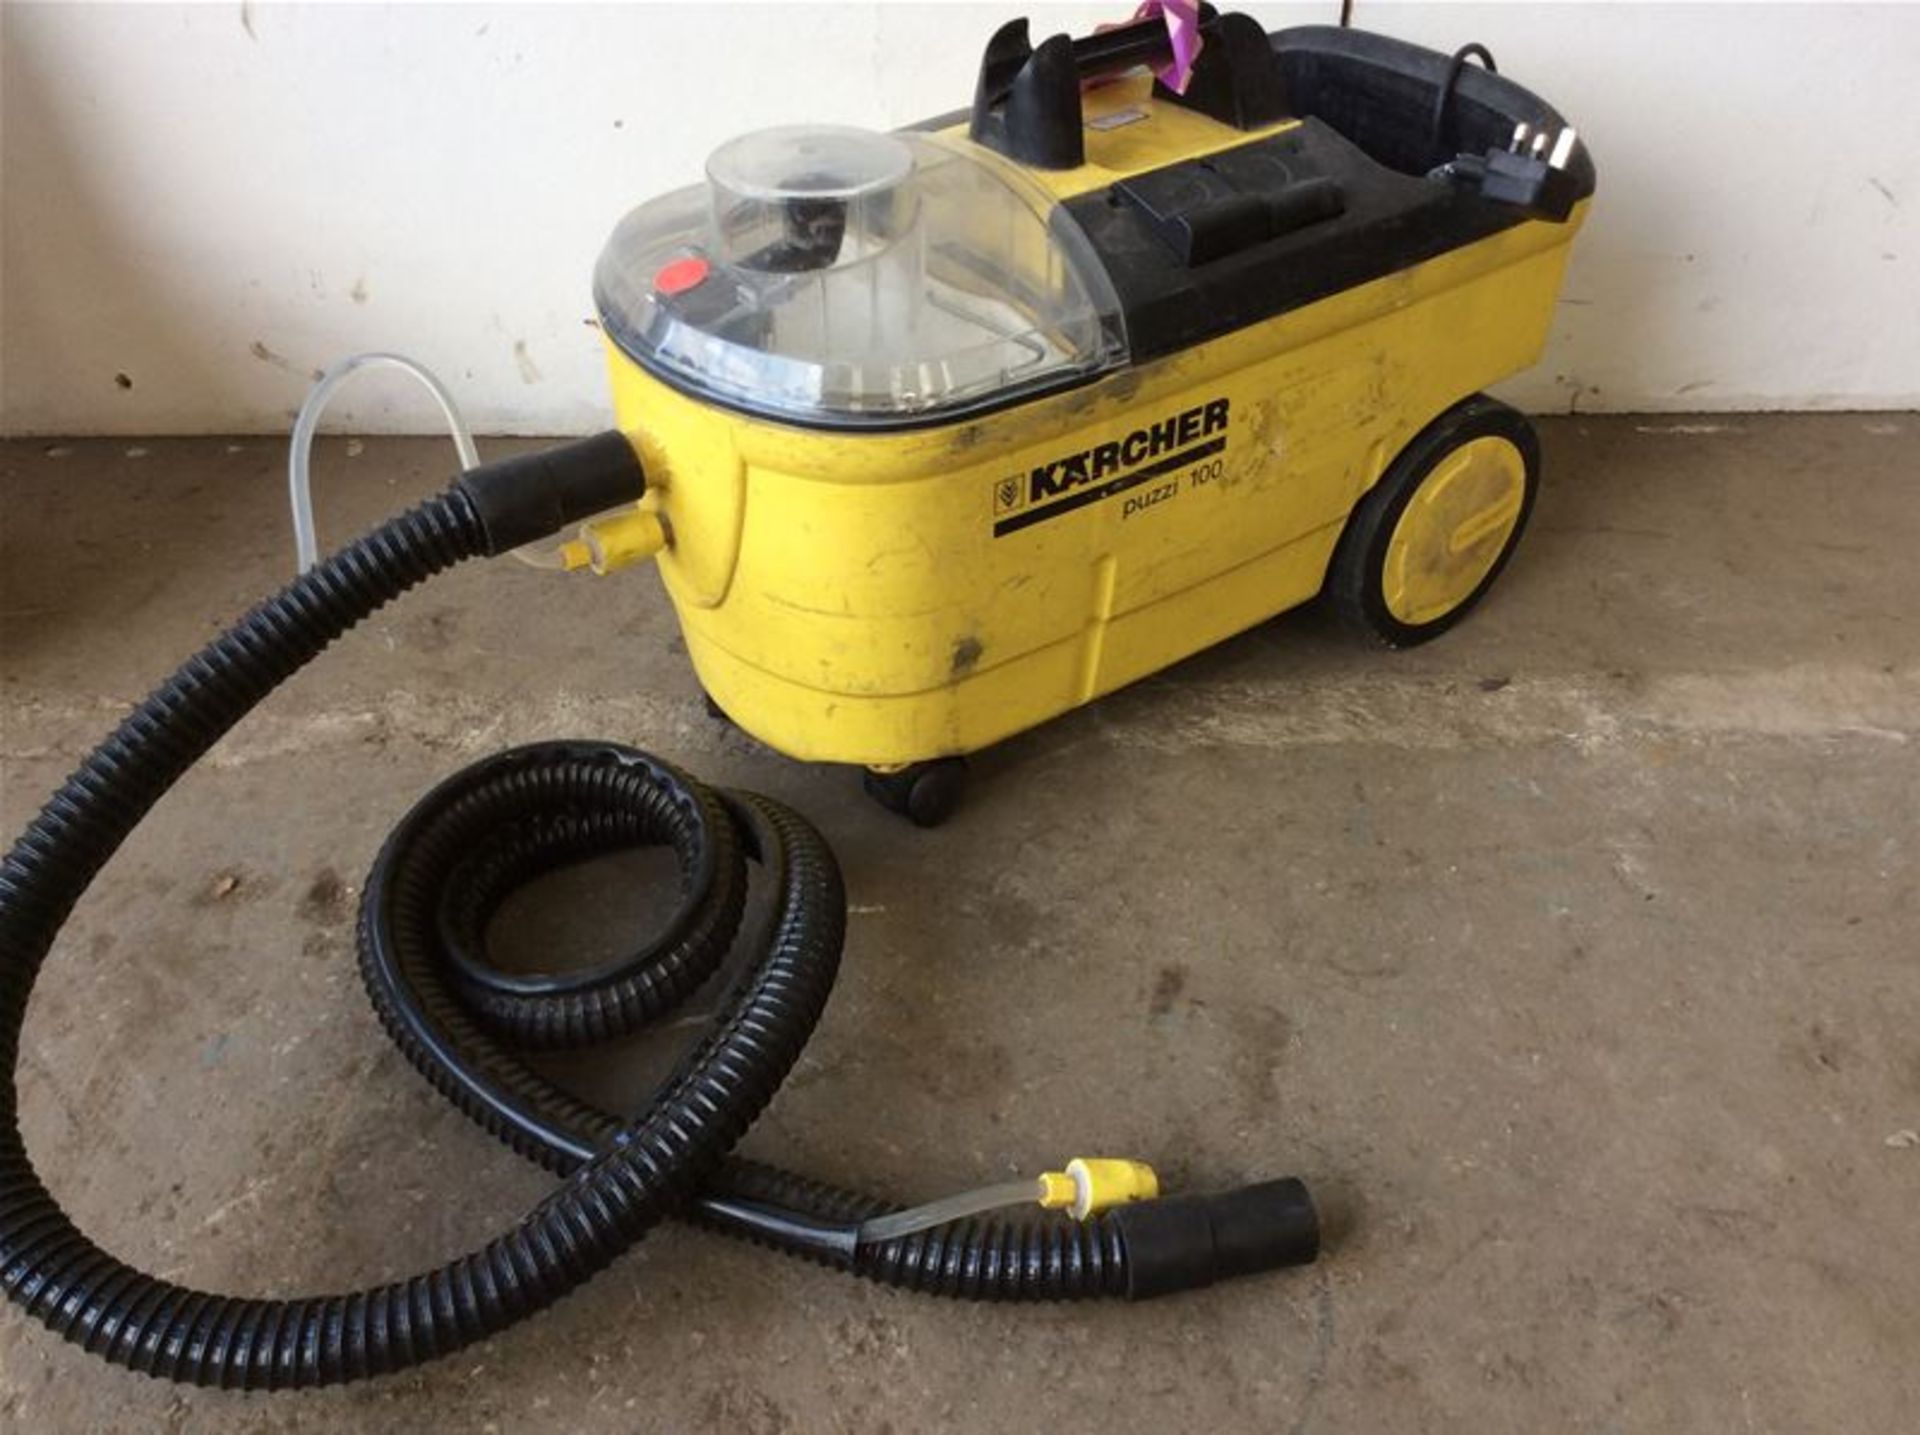 KARCHER PUZZI 100 CARPET CLEANER - SMALL